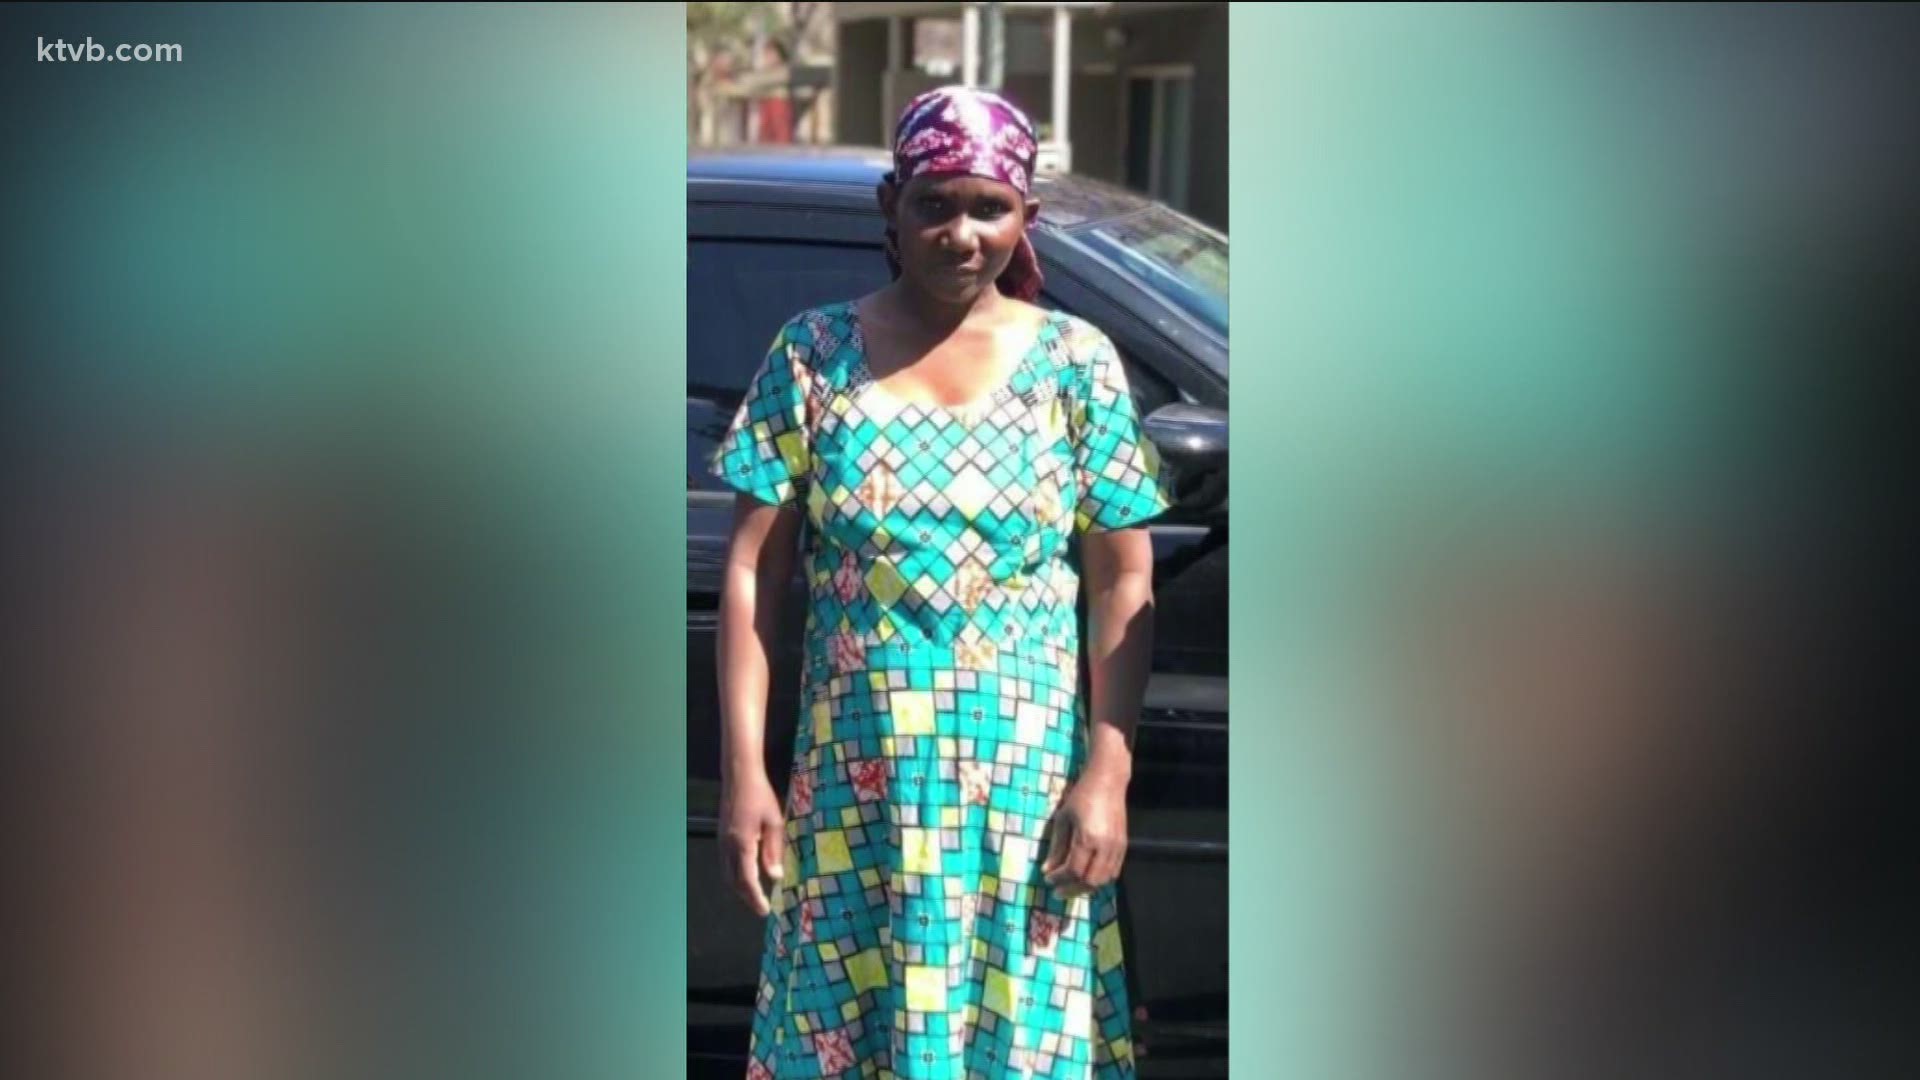 Residents in the area where Beatrice Nyabenda was last seen are asked to check around their homes, in yards, and inside any outbuildings for the missing woman.